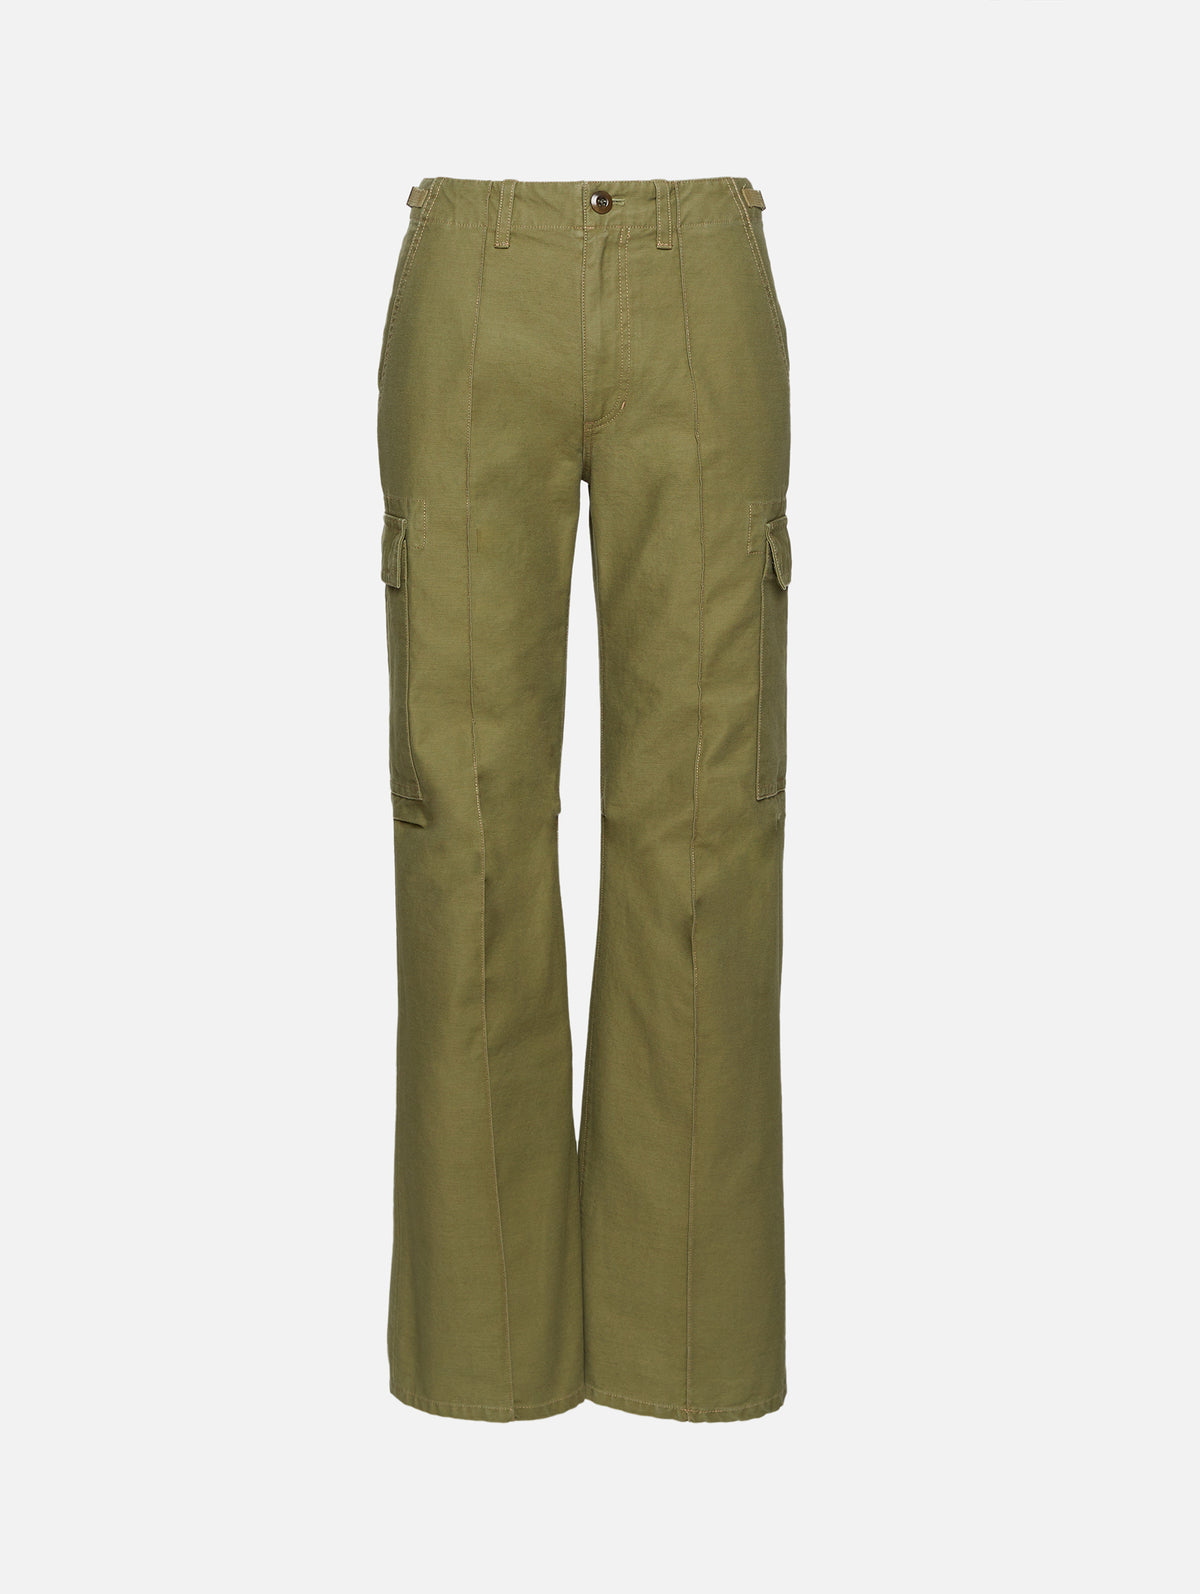 view 1 - Military Trouser